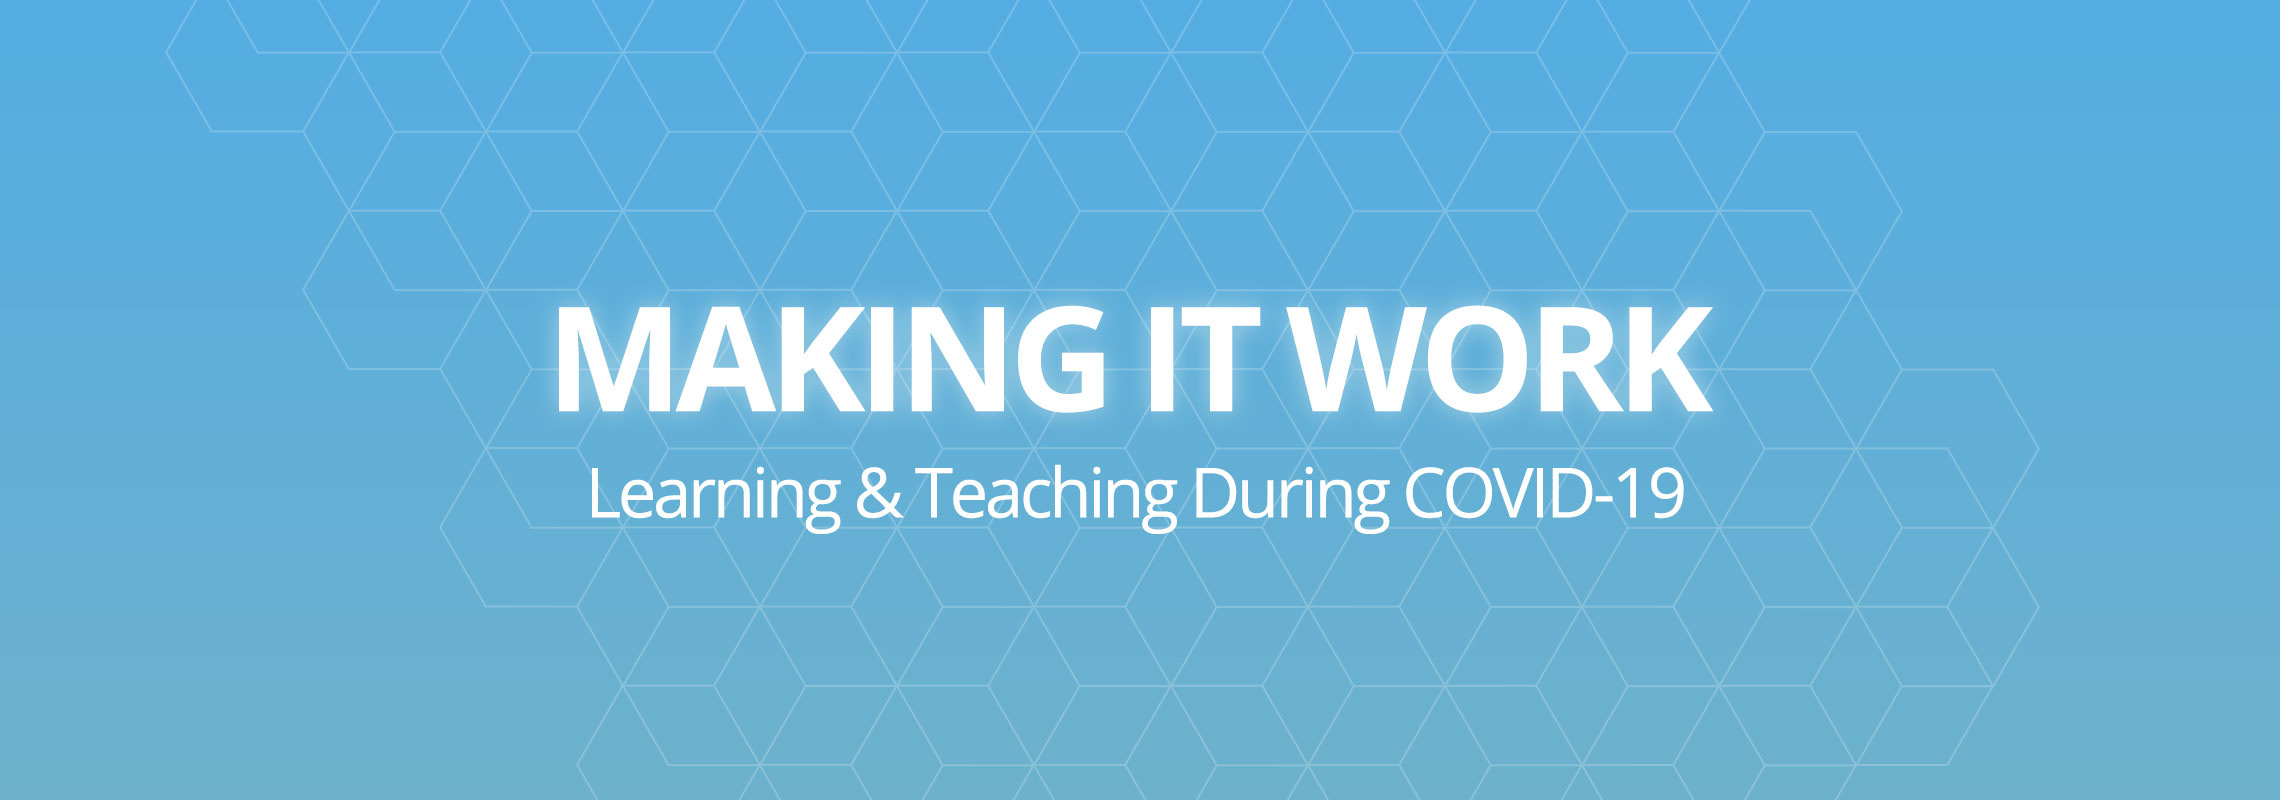 Making It Work - Learning & Teaching During COVID-19